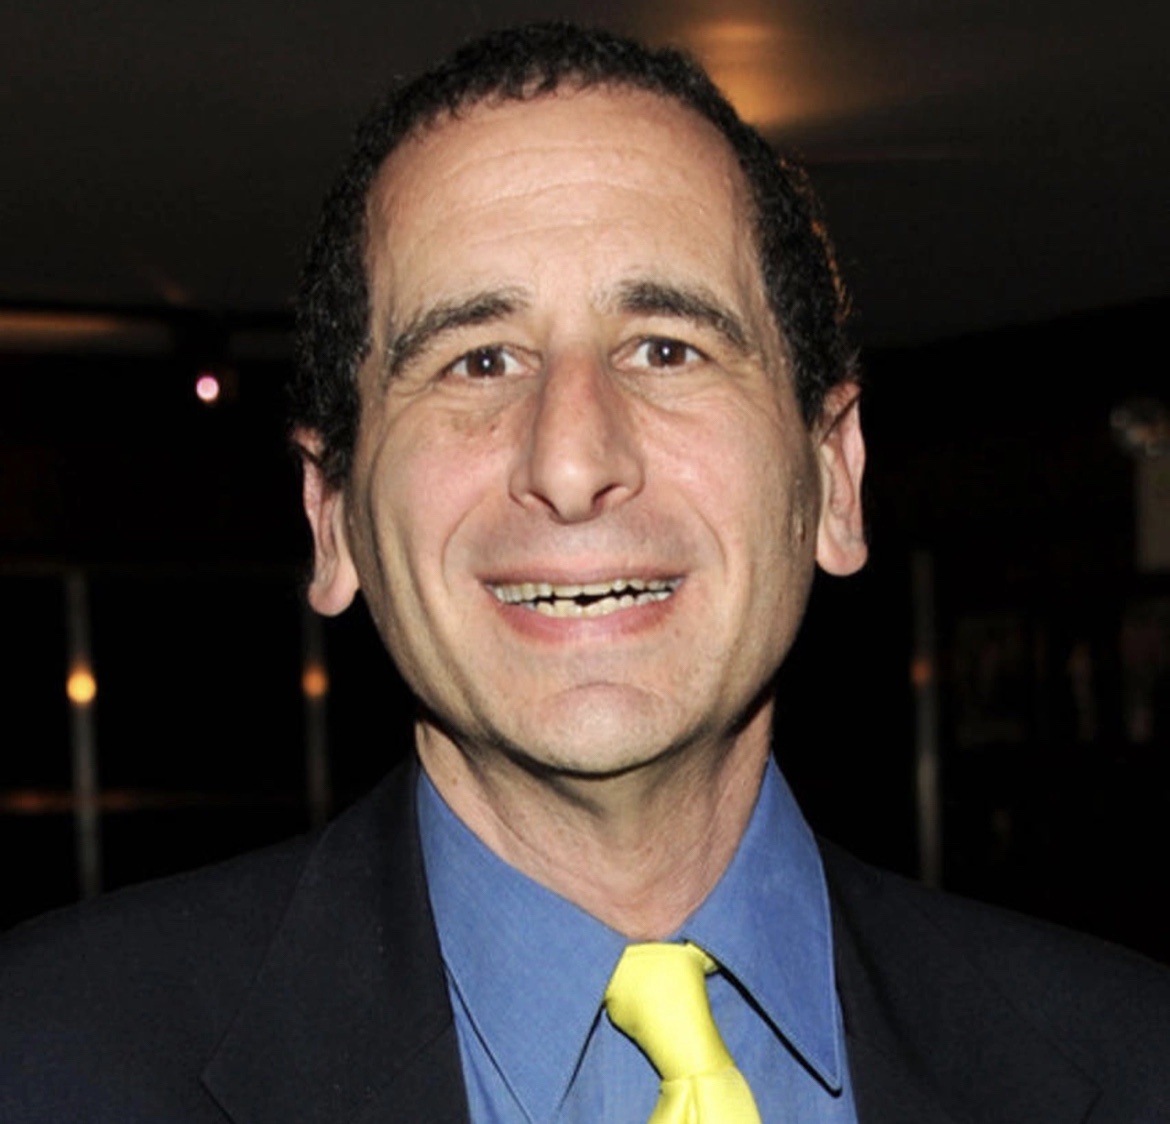 Mike Reiss Biography